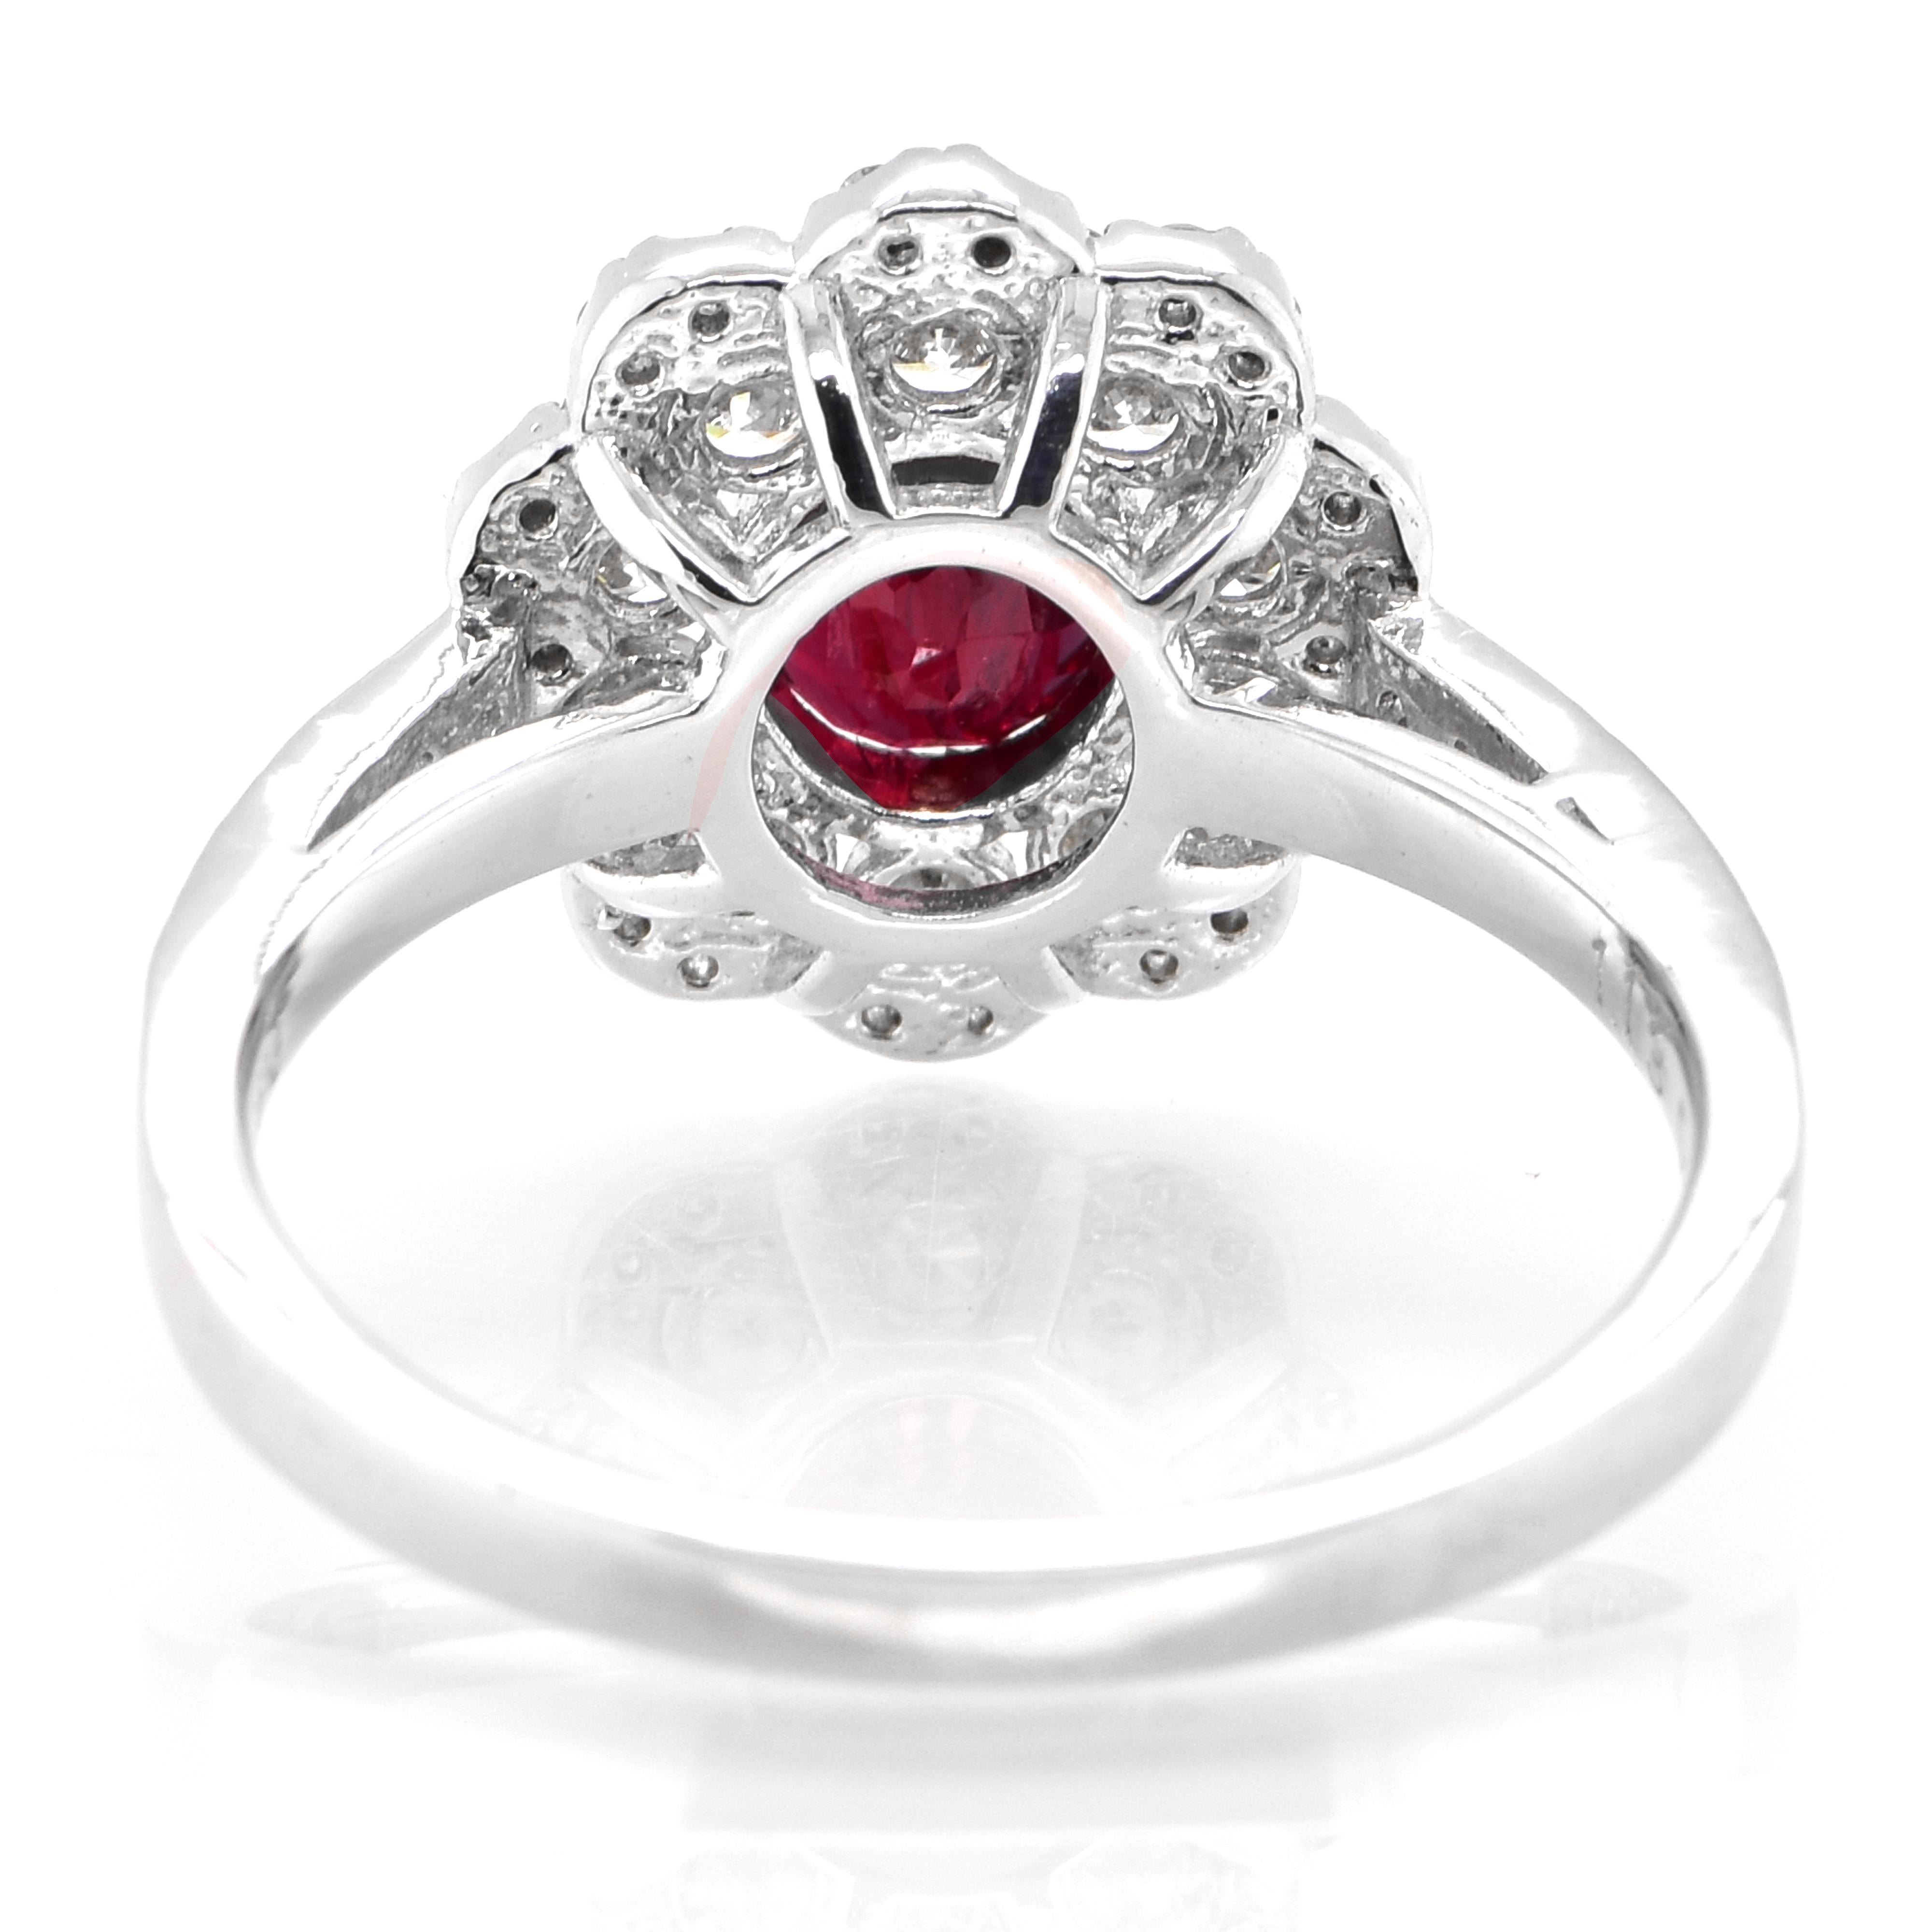 Women's GIA Certified 1.13 Carat Natural, Unheated Ruby and Diamond Ring set in Platinum